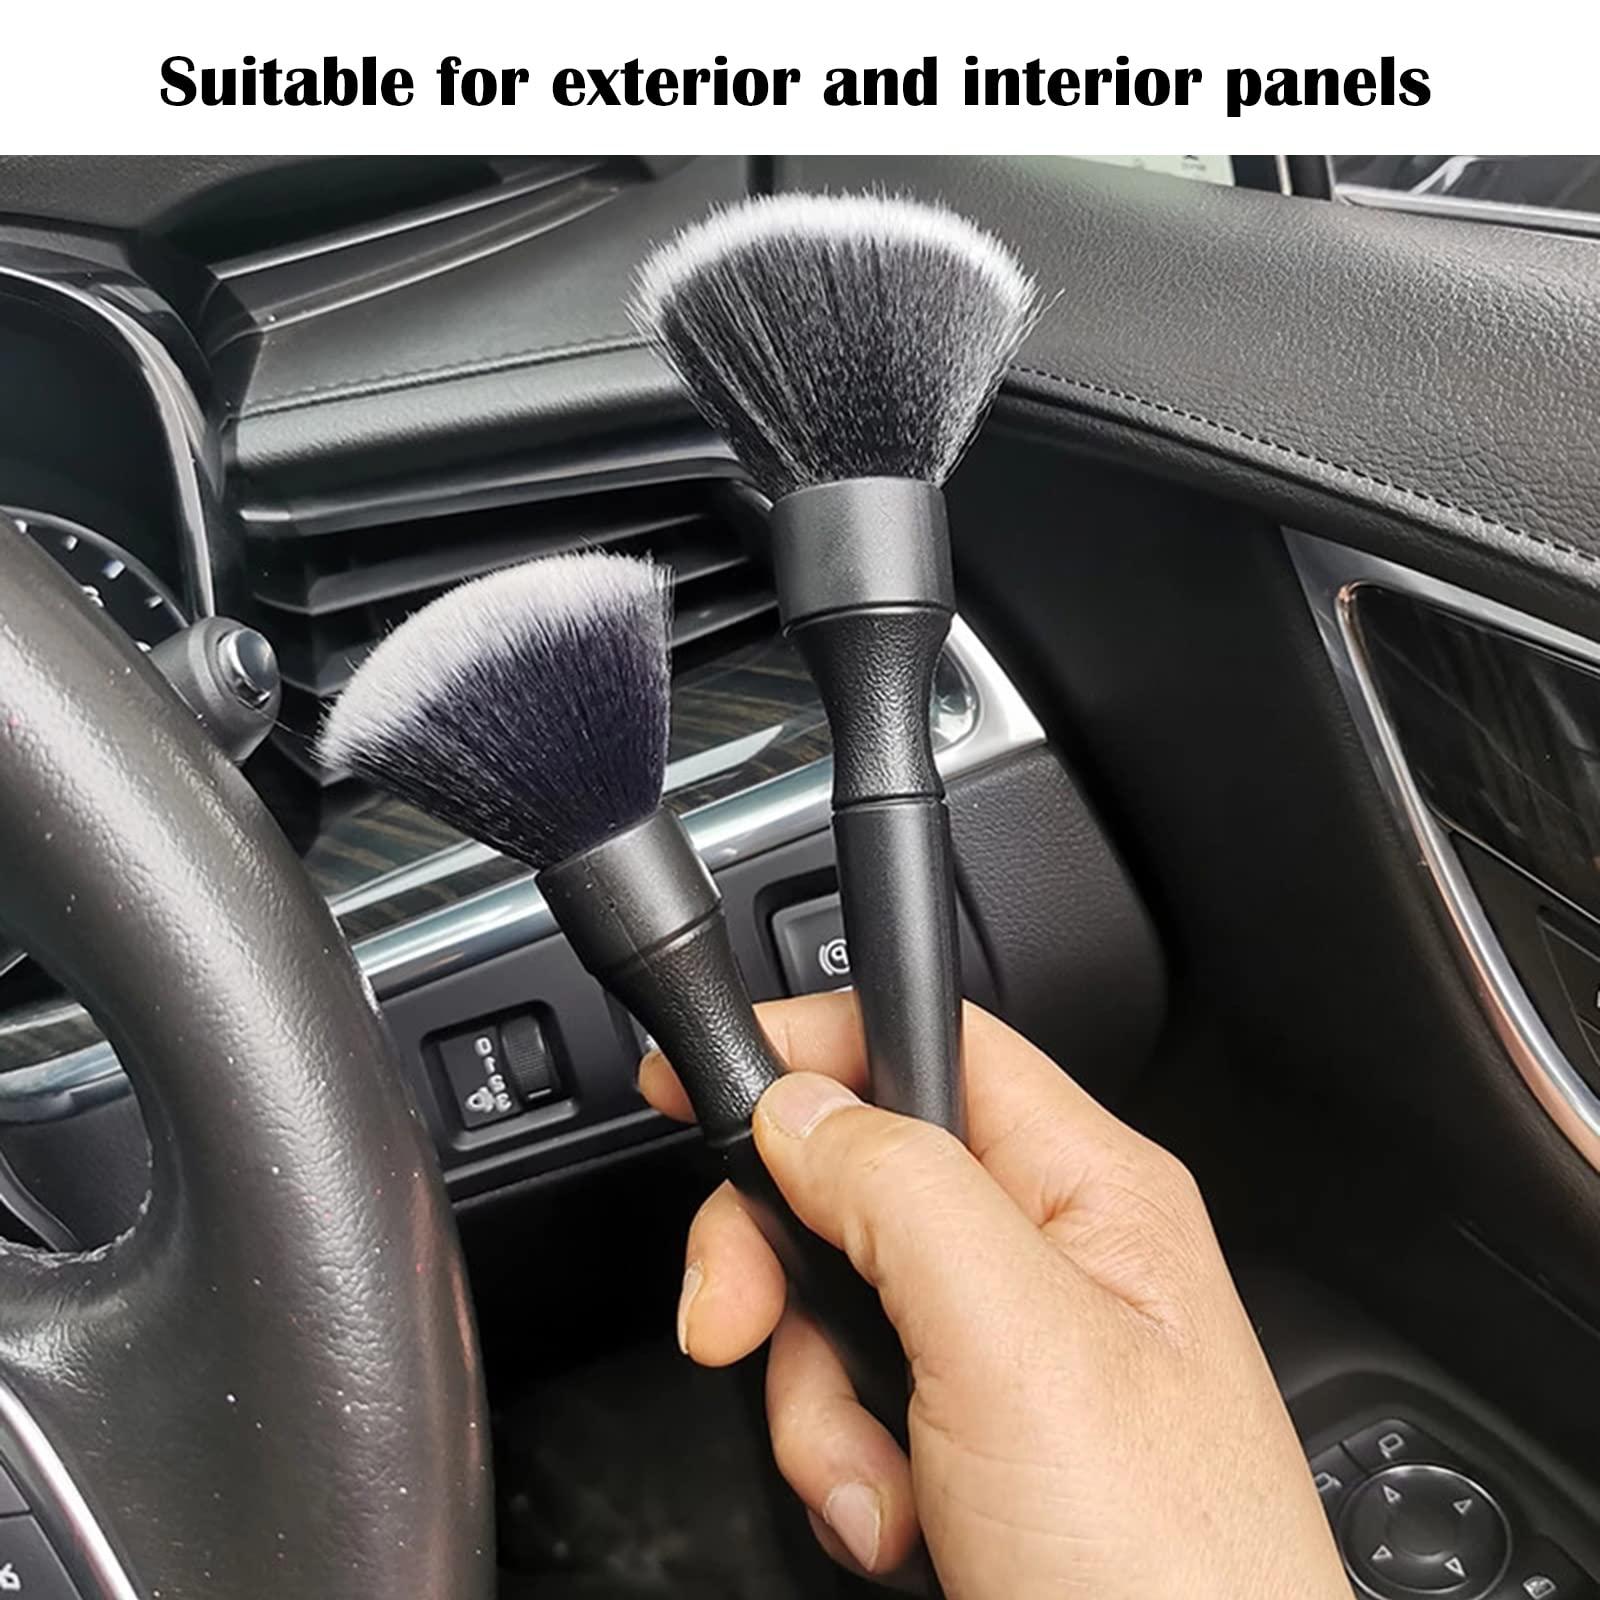 ALI2 Detailing Brush Set,Soft Comfortable Grip for Car Interior and Exterior Detailing Cleaning,Black 3